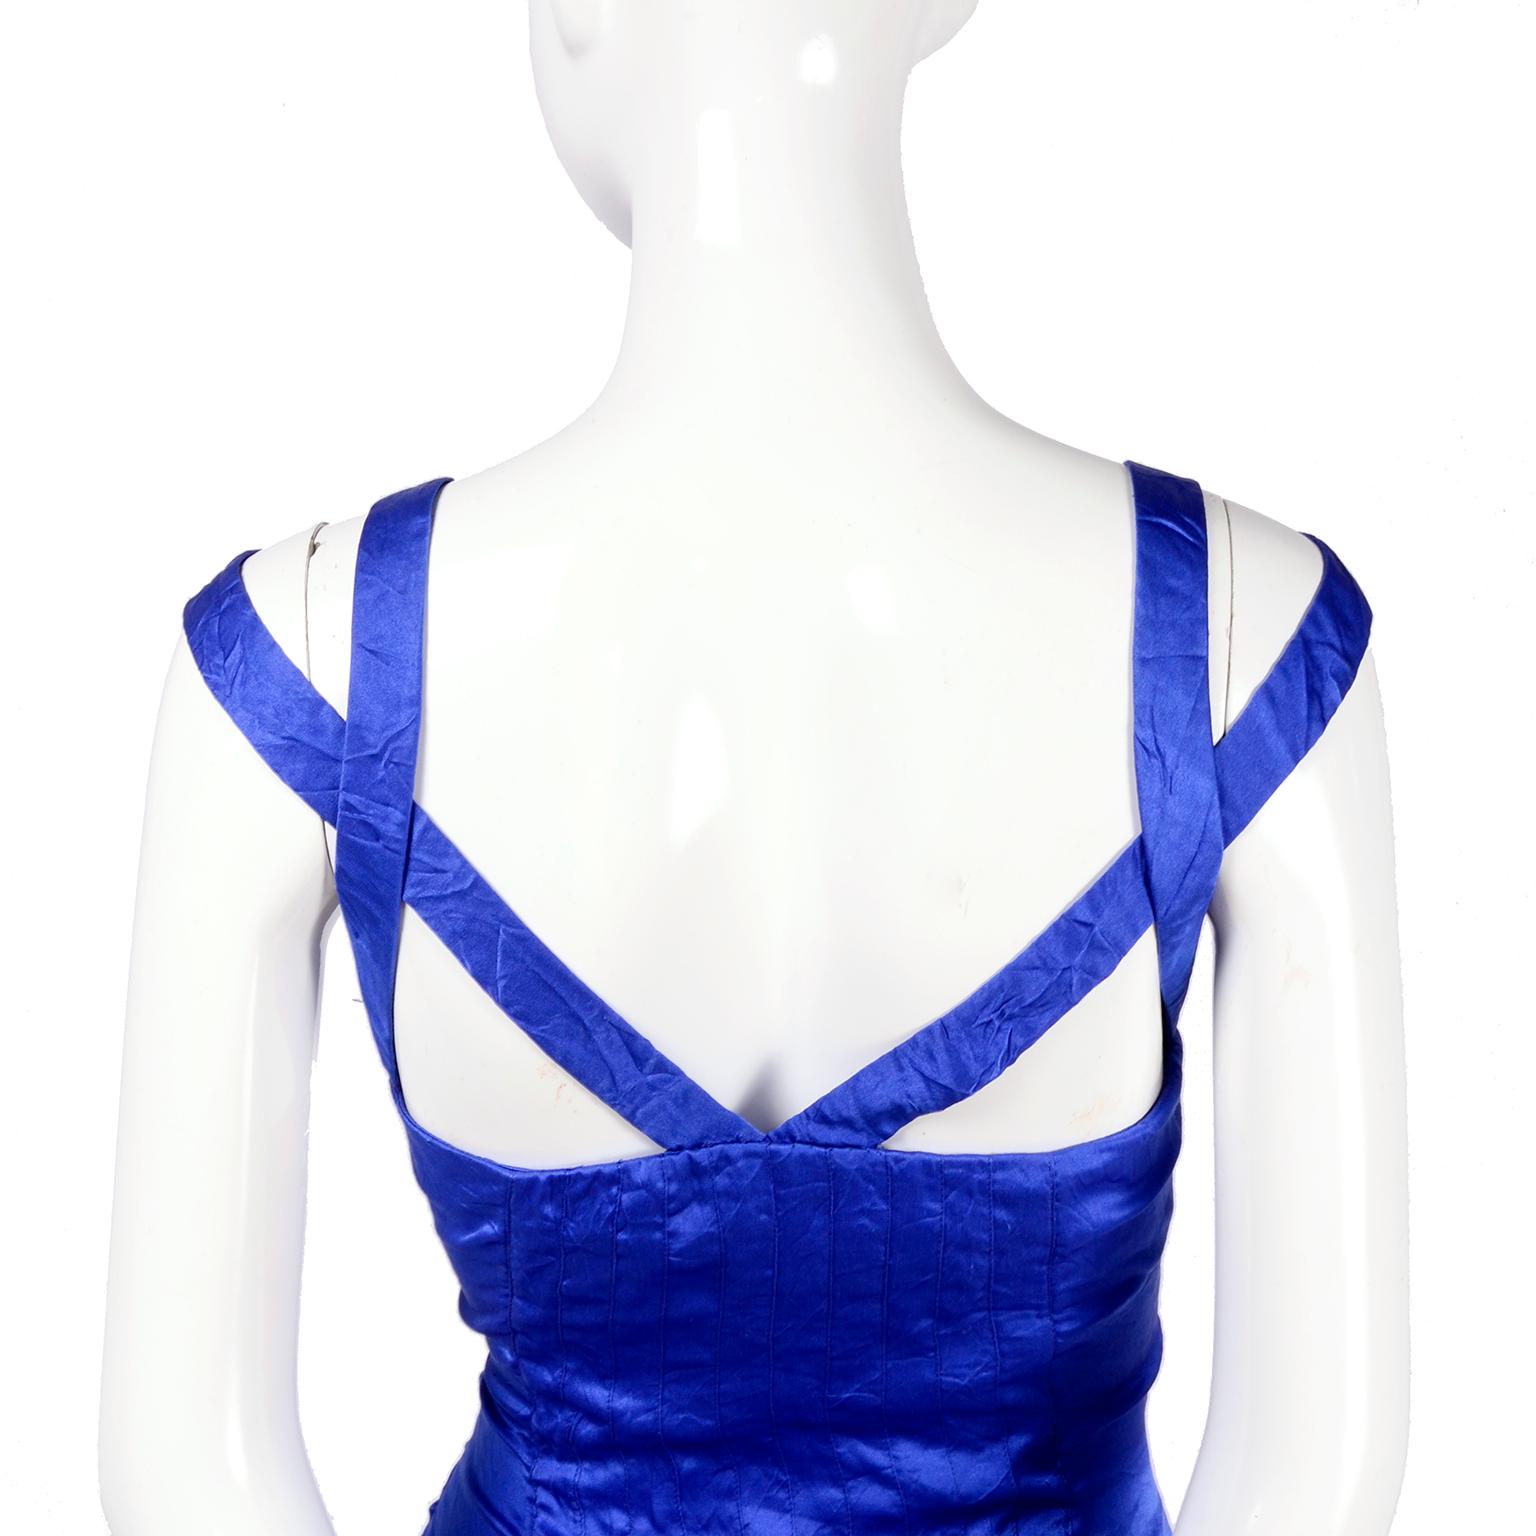 Gianni Versace Couture Blue Silk Documented Runway Dress, 1994  In Excellent Condition For Sale In Portland, OR